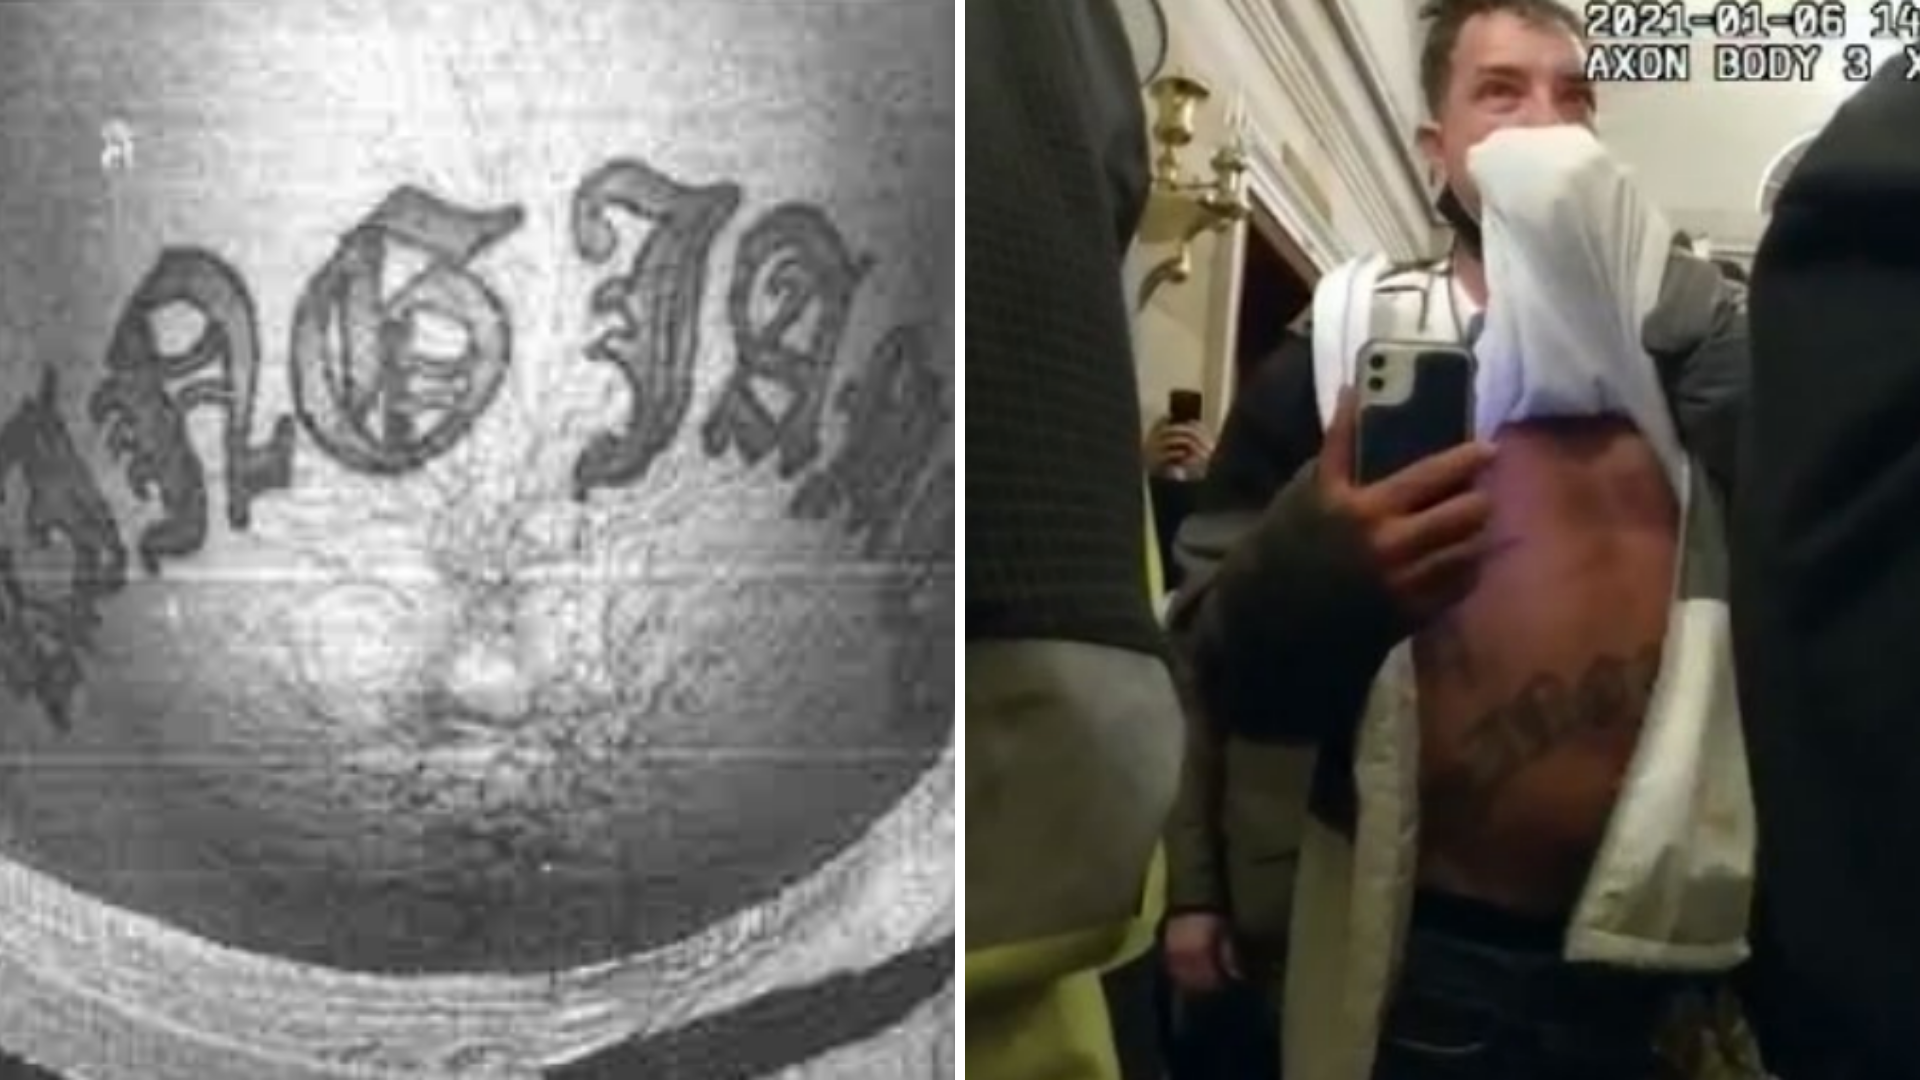 The criminal complaint said James McGrew was seen on videos and photos at the Capitol building. He lifted up his shirt revealing the tattoo, seen on police body cam.